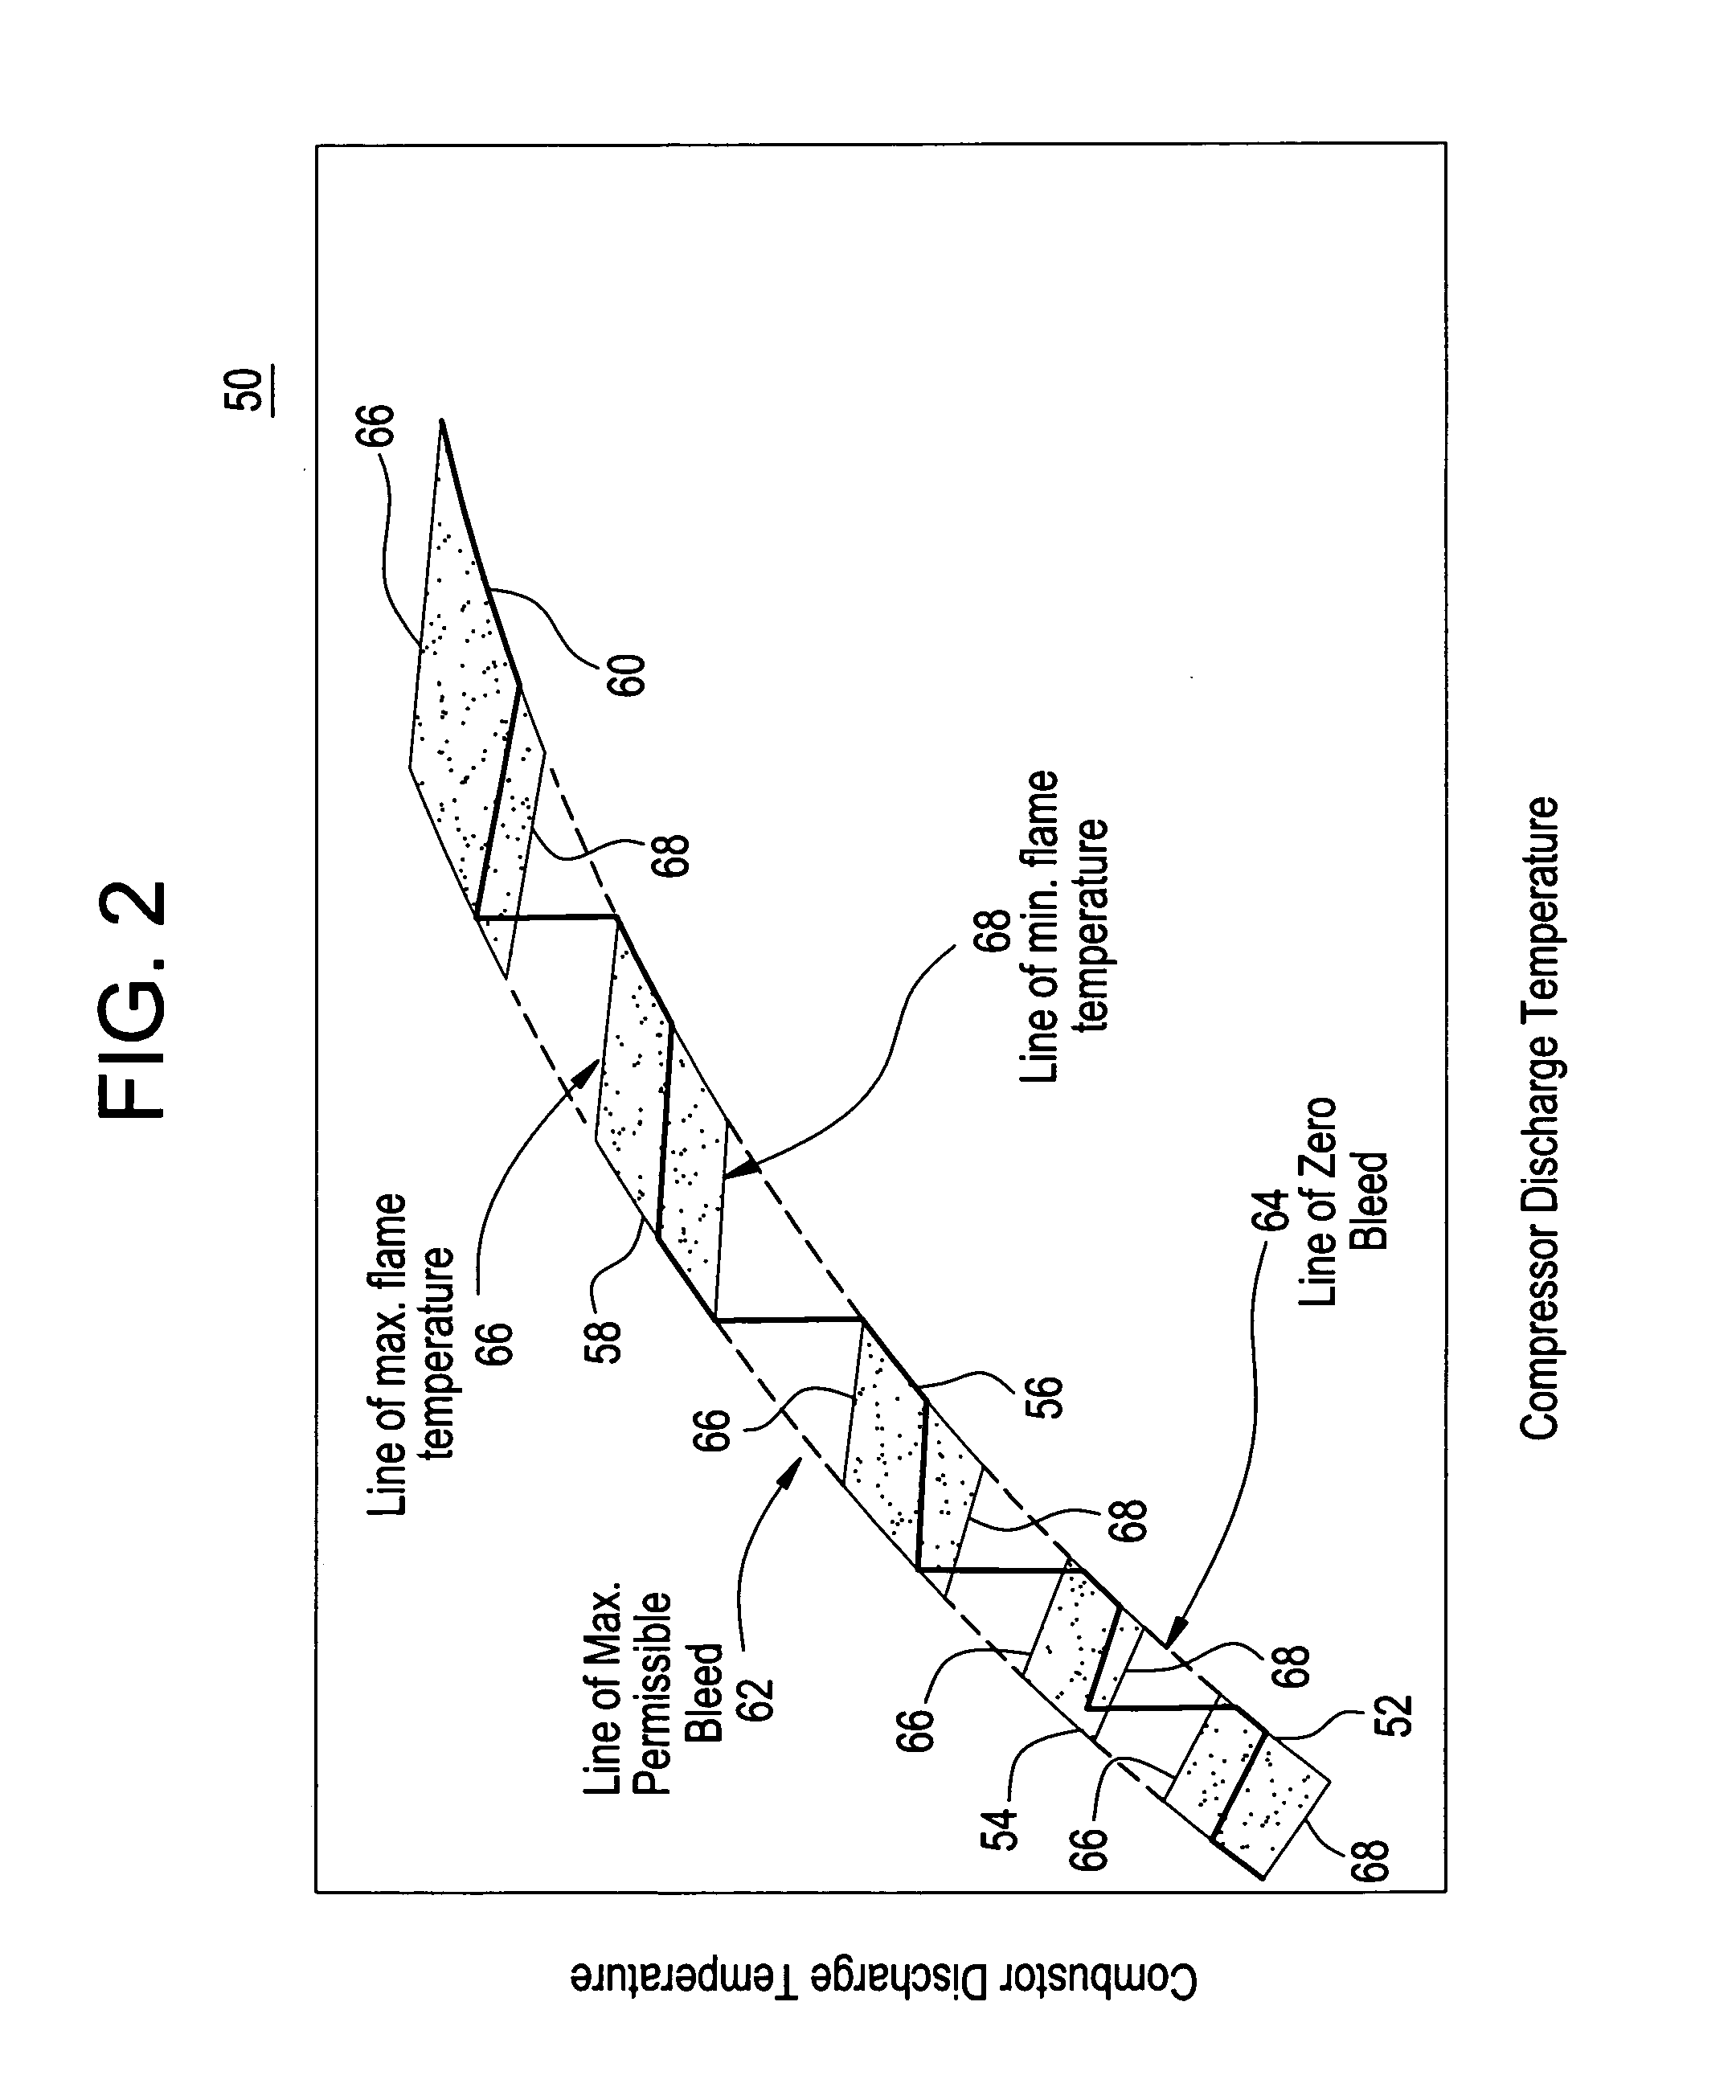 Automatic mapping logic for a combustor in a gas turbine engine